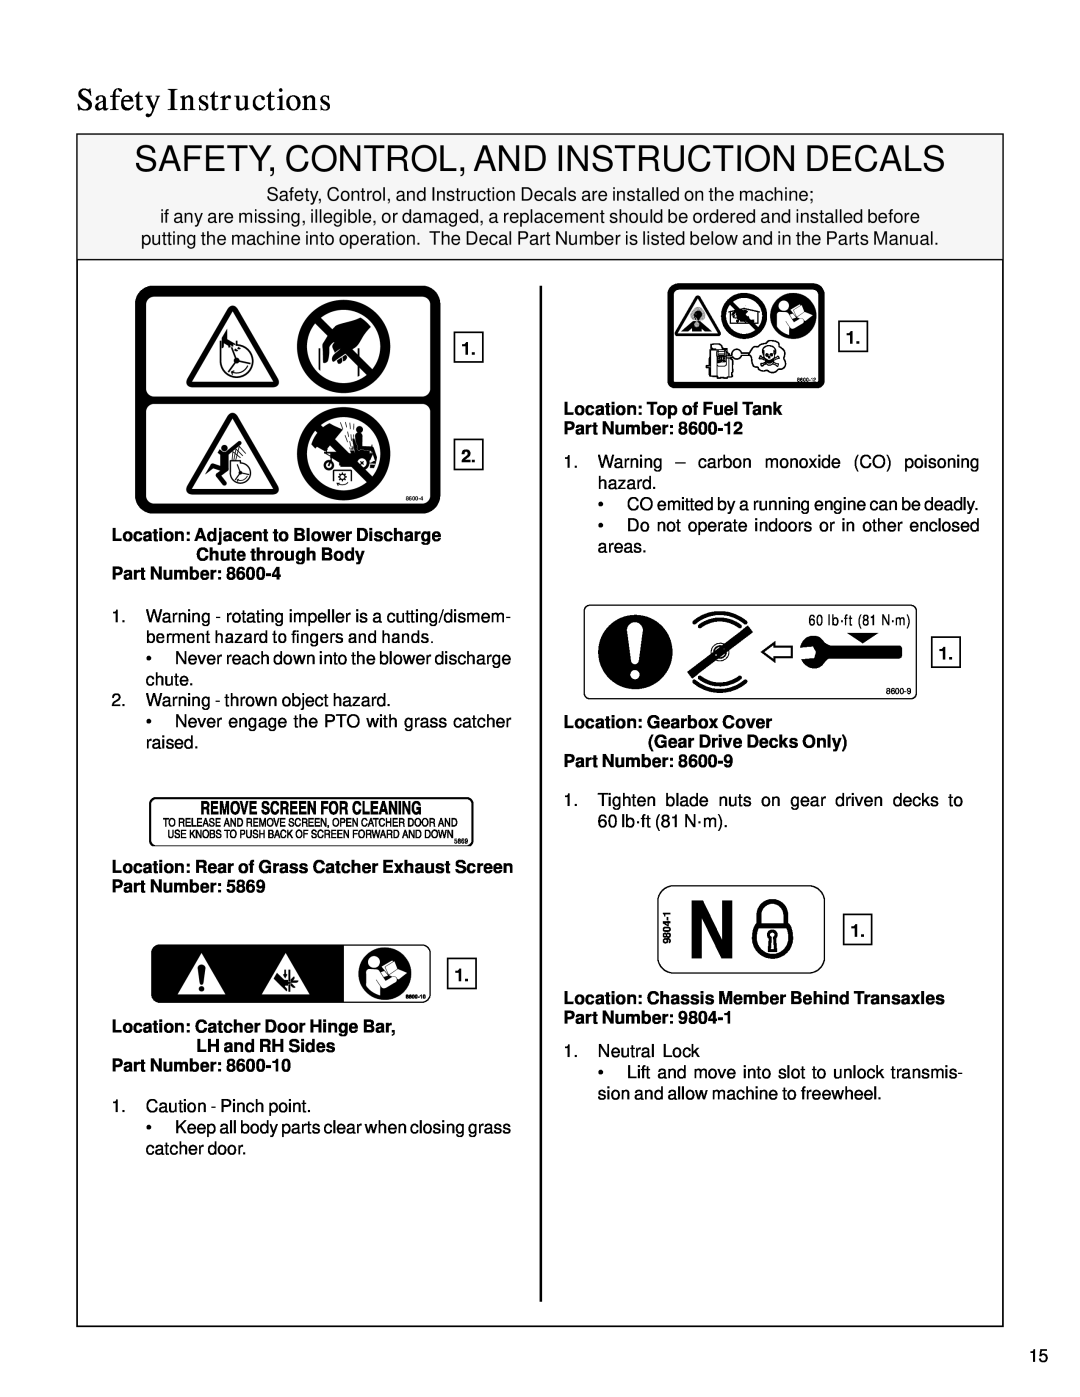 Walker S14 manual Safety, Control, And Instruction Decals, Safety Instructions, LH and RH Sides Part Number 